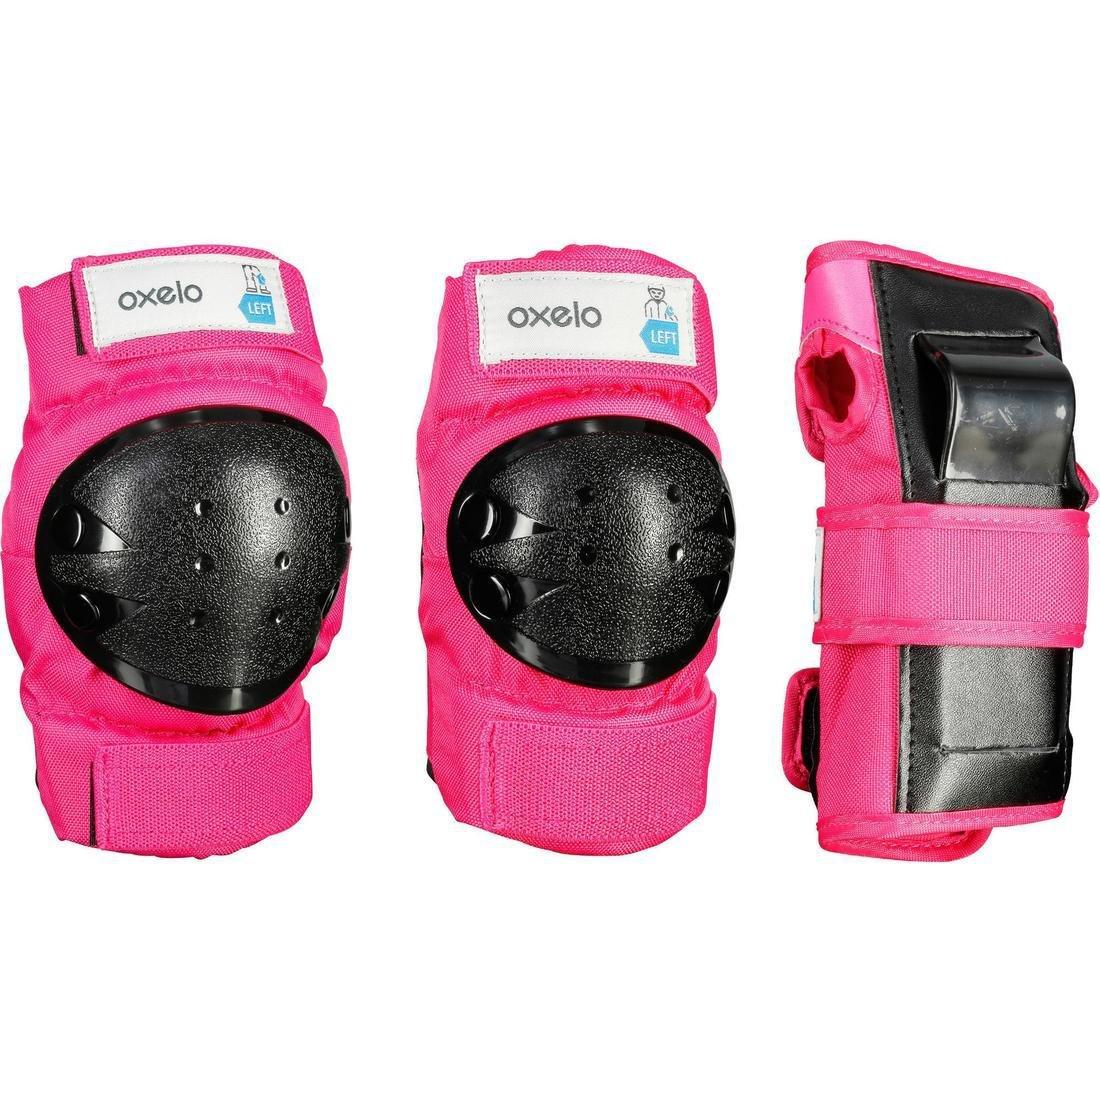 OXELO - Unisex Kids 2 X 3-Piece Skating Skateboard Scooter Protective Gear Basic, Pink